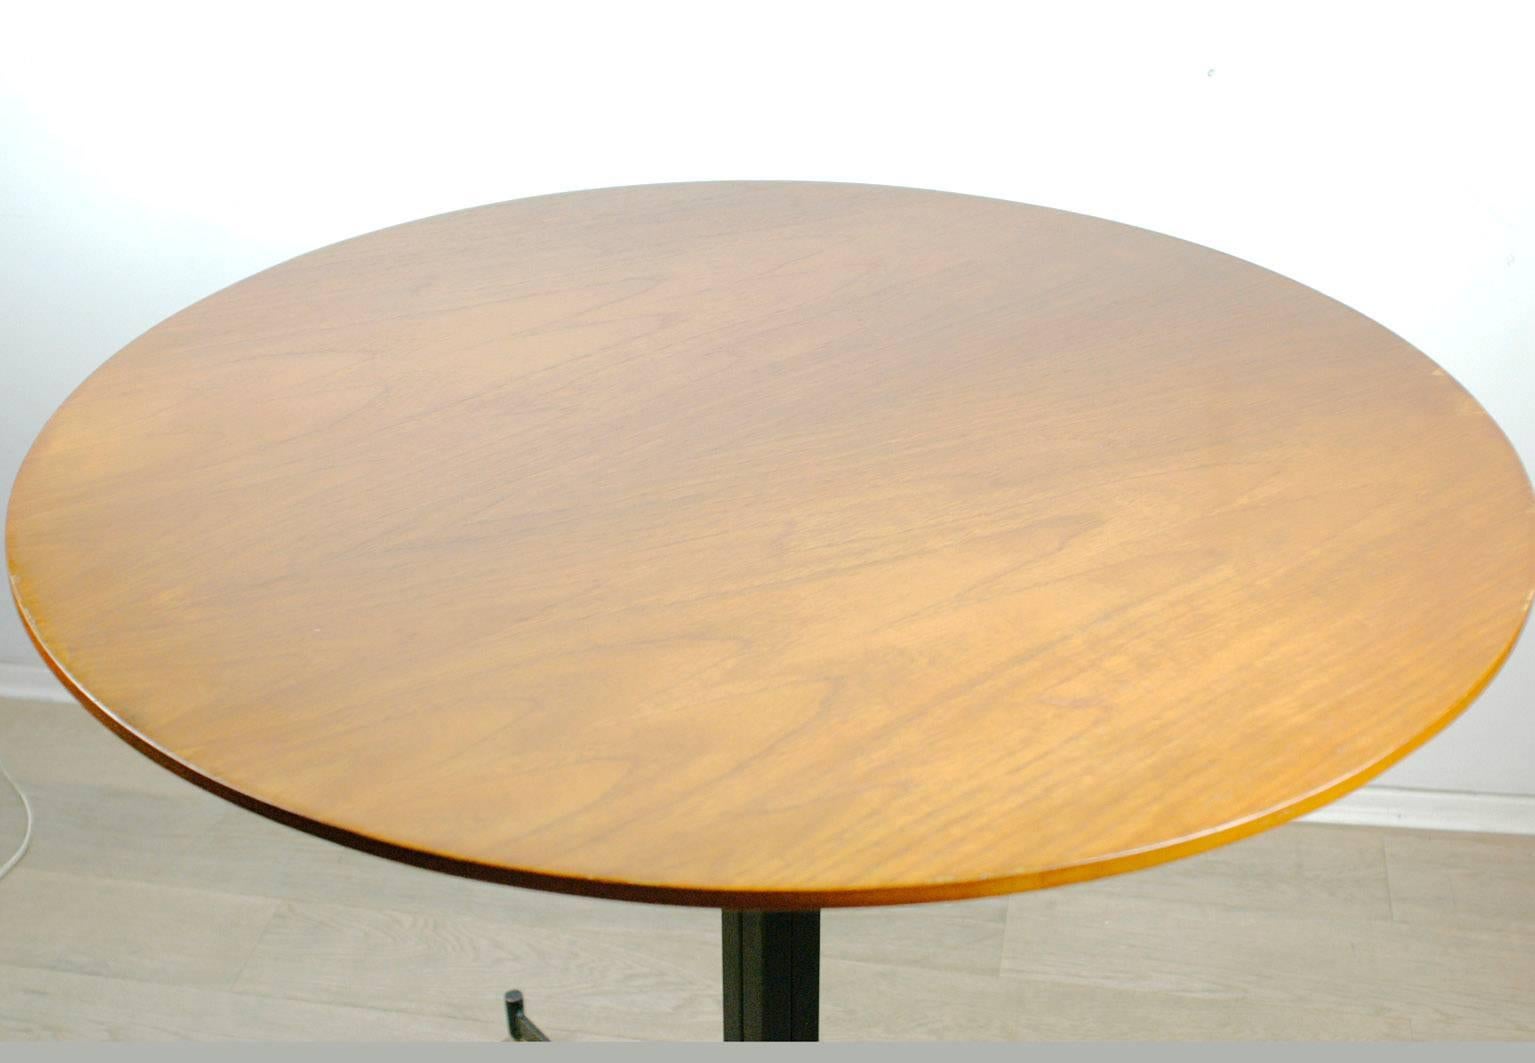 Small elegant Italian Midcentury circular table for four-five persons.
Teakwood top with black laquered metal and brass base.